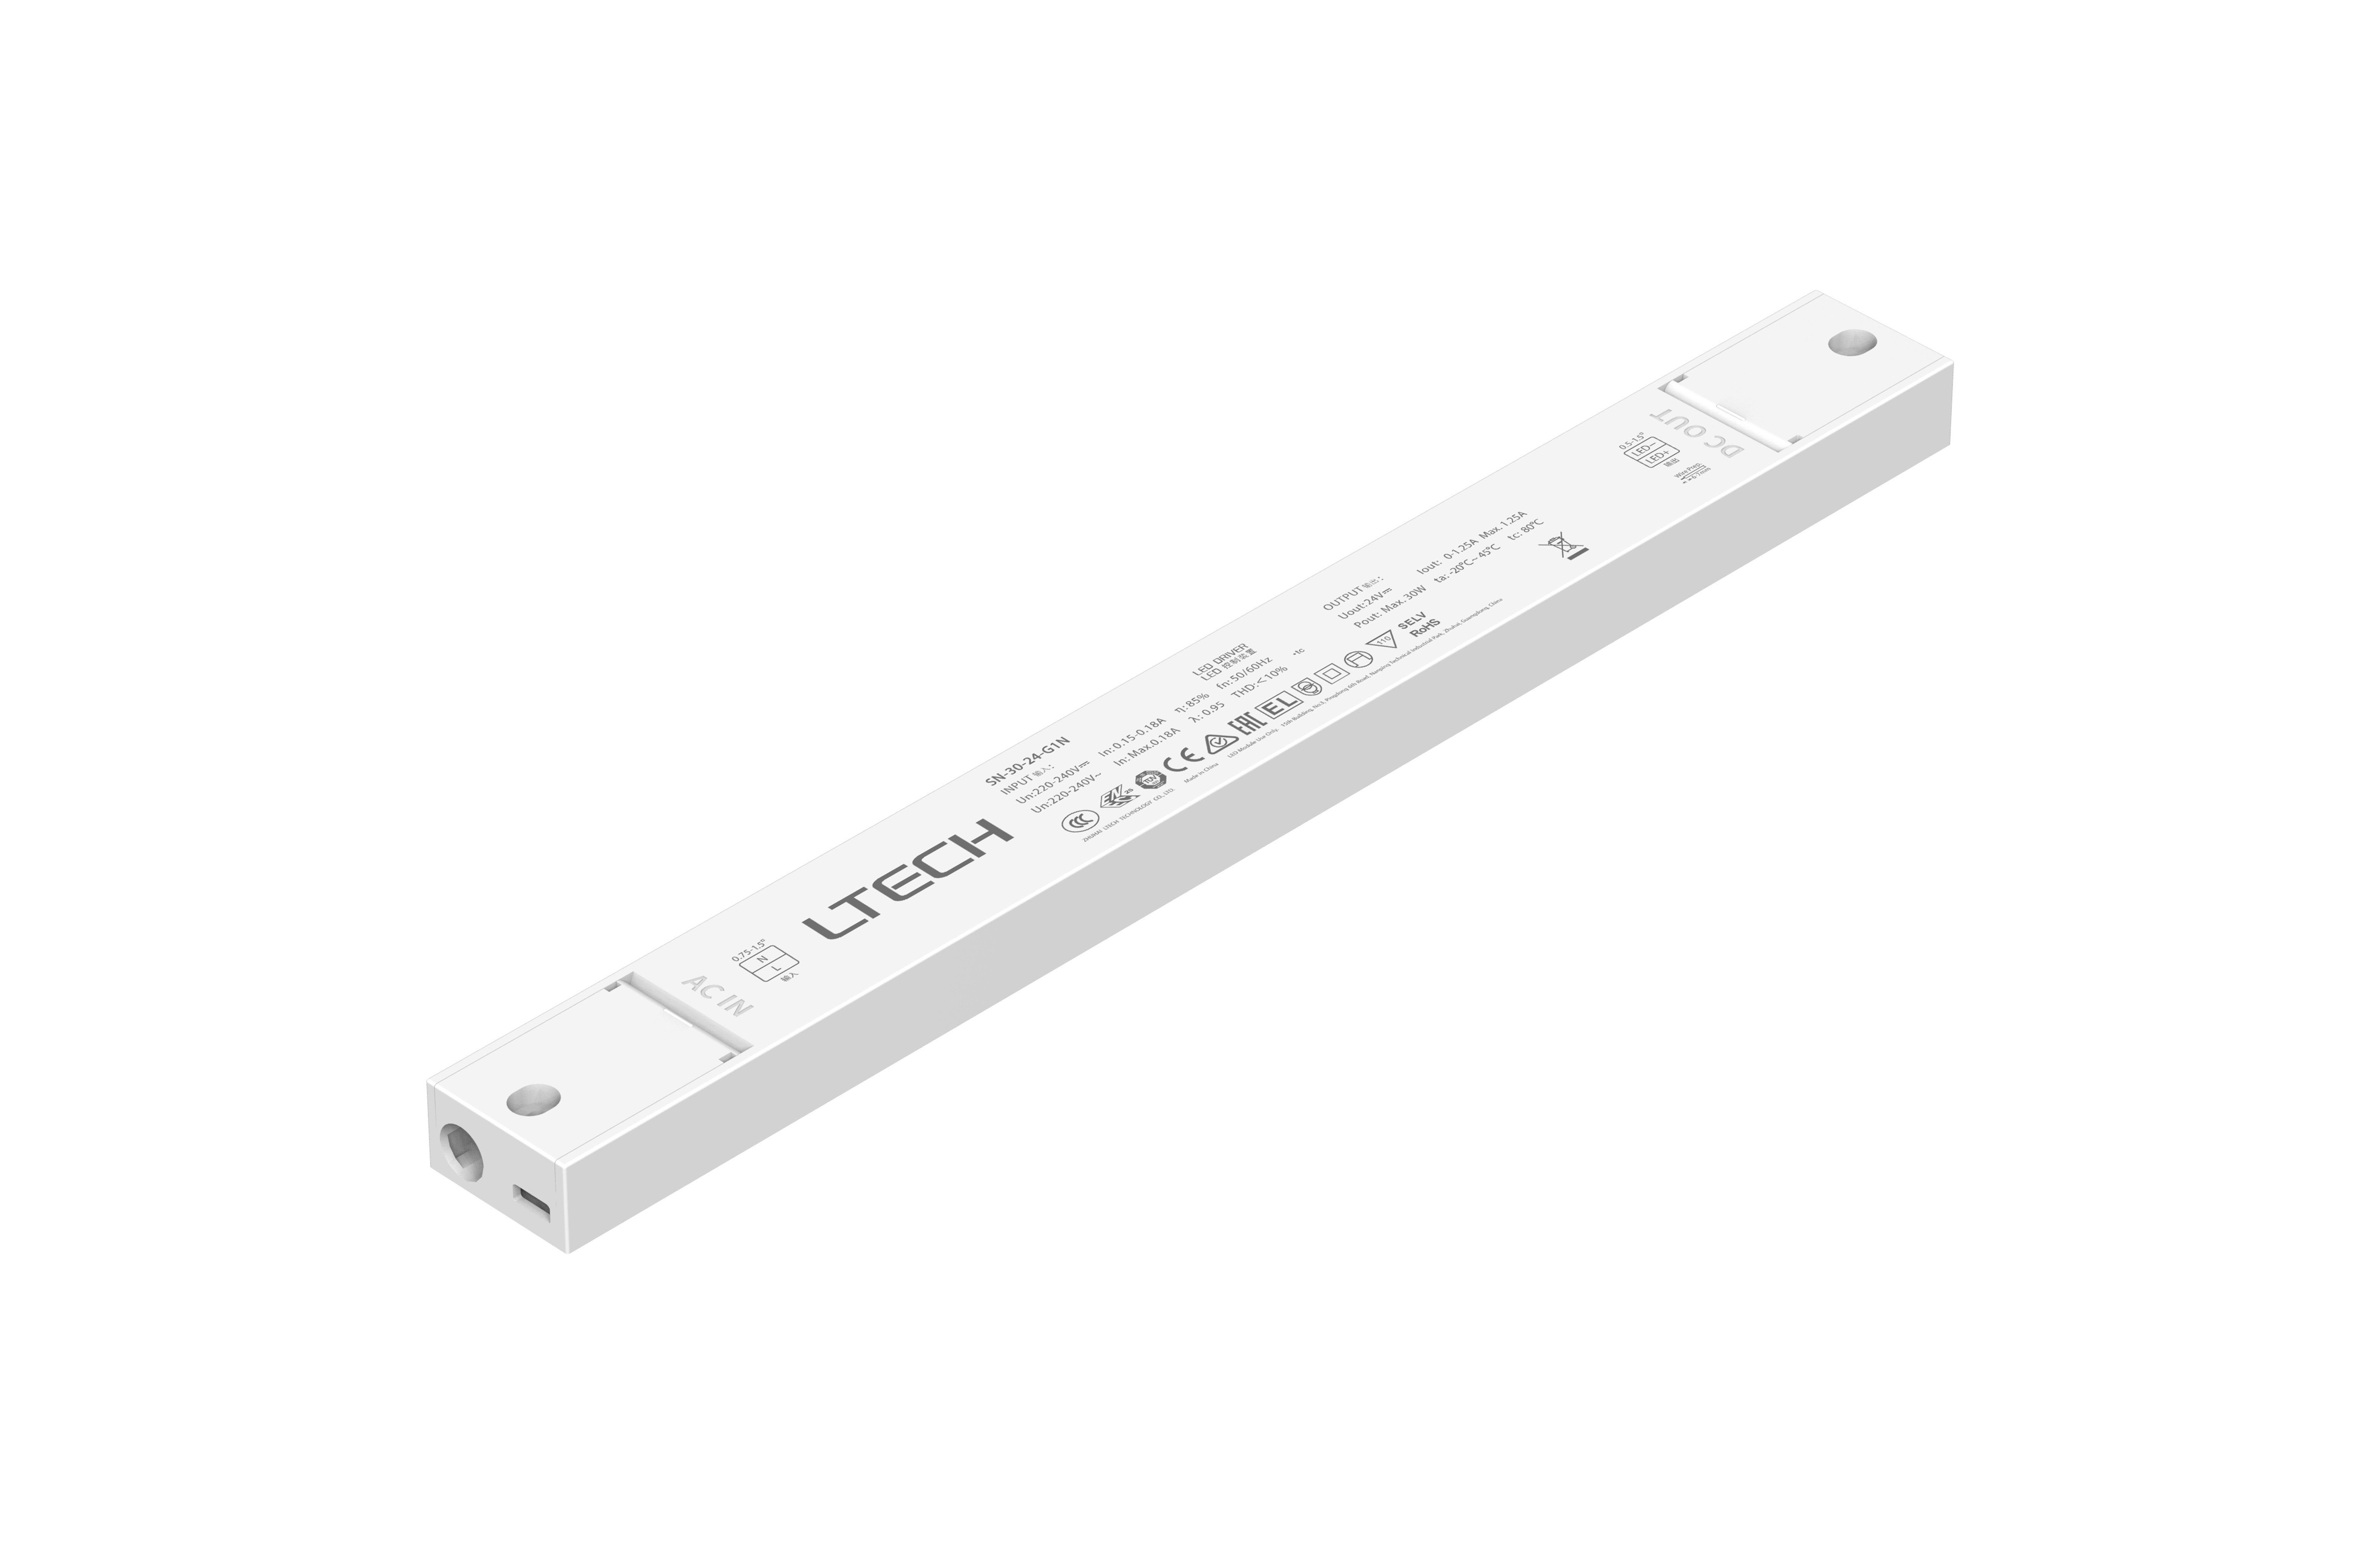 SN-30-24-G1NF-NFC  Intelligent Constant Current NFC ON/OFF LED Driver,  30W, 24VDC 1.25A , 220-240Vac, IP20, 5yrs Warrenty.